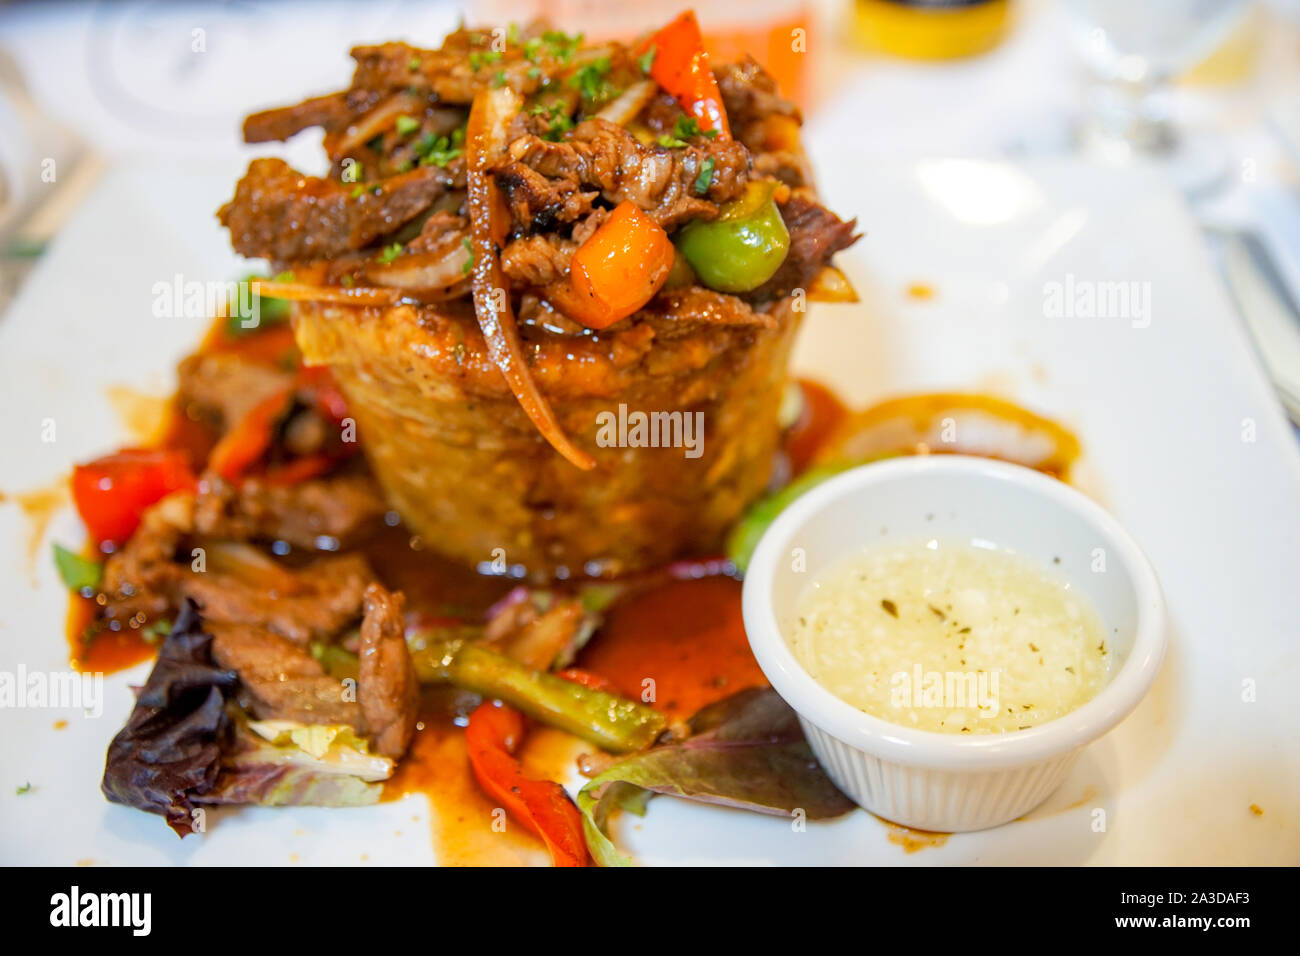 Delicious Puerto Rican Mofongo with Steak and Garlic Sauce. Stock Photo